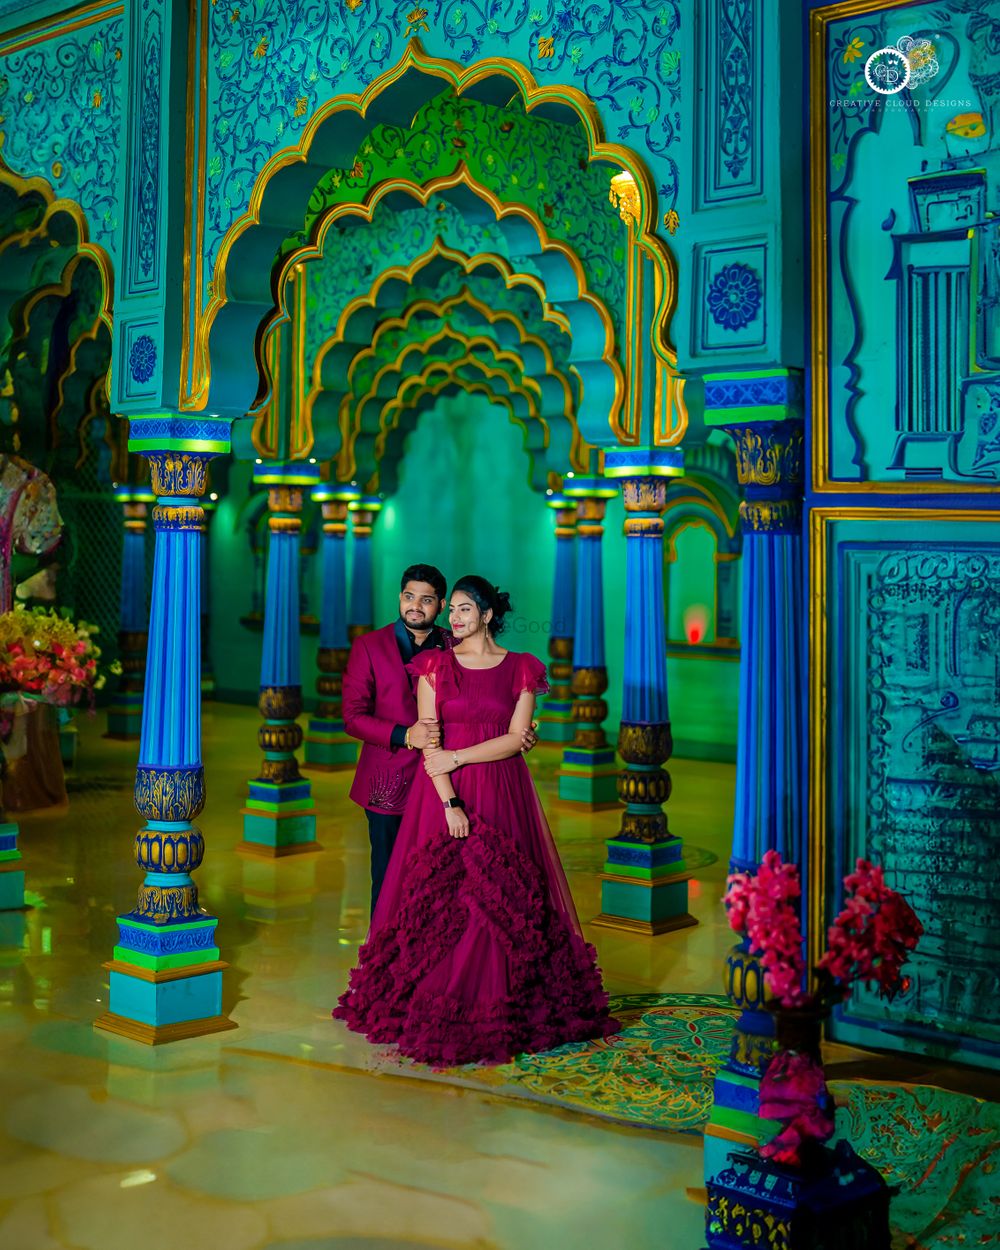 Photo From Sruthi & Abhinav - By Creative Cloud Designs